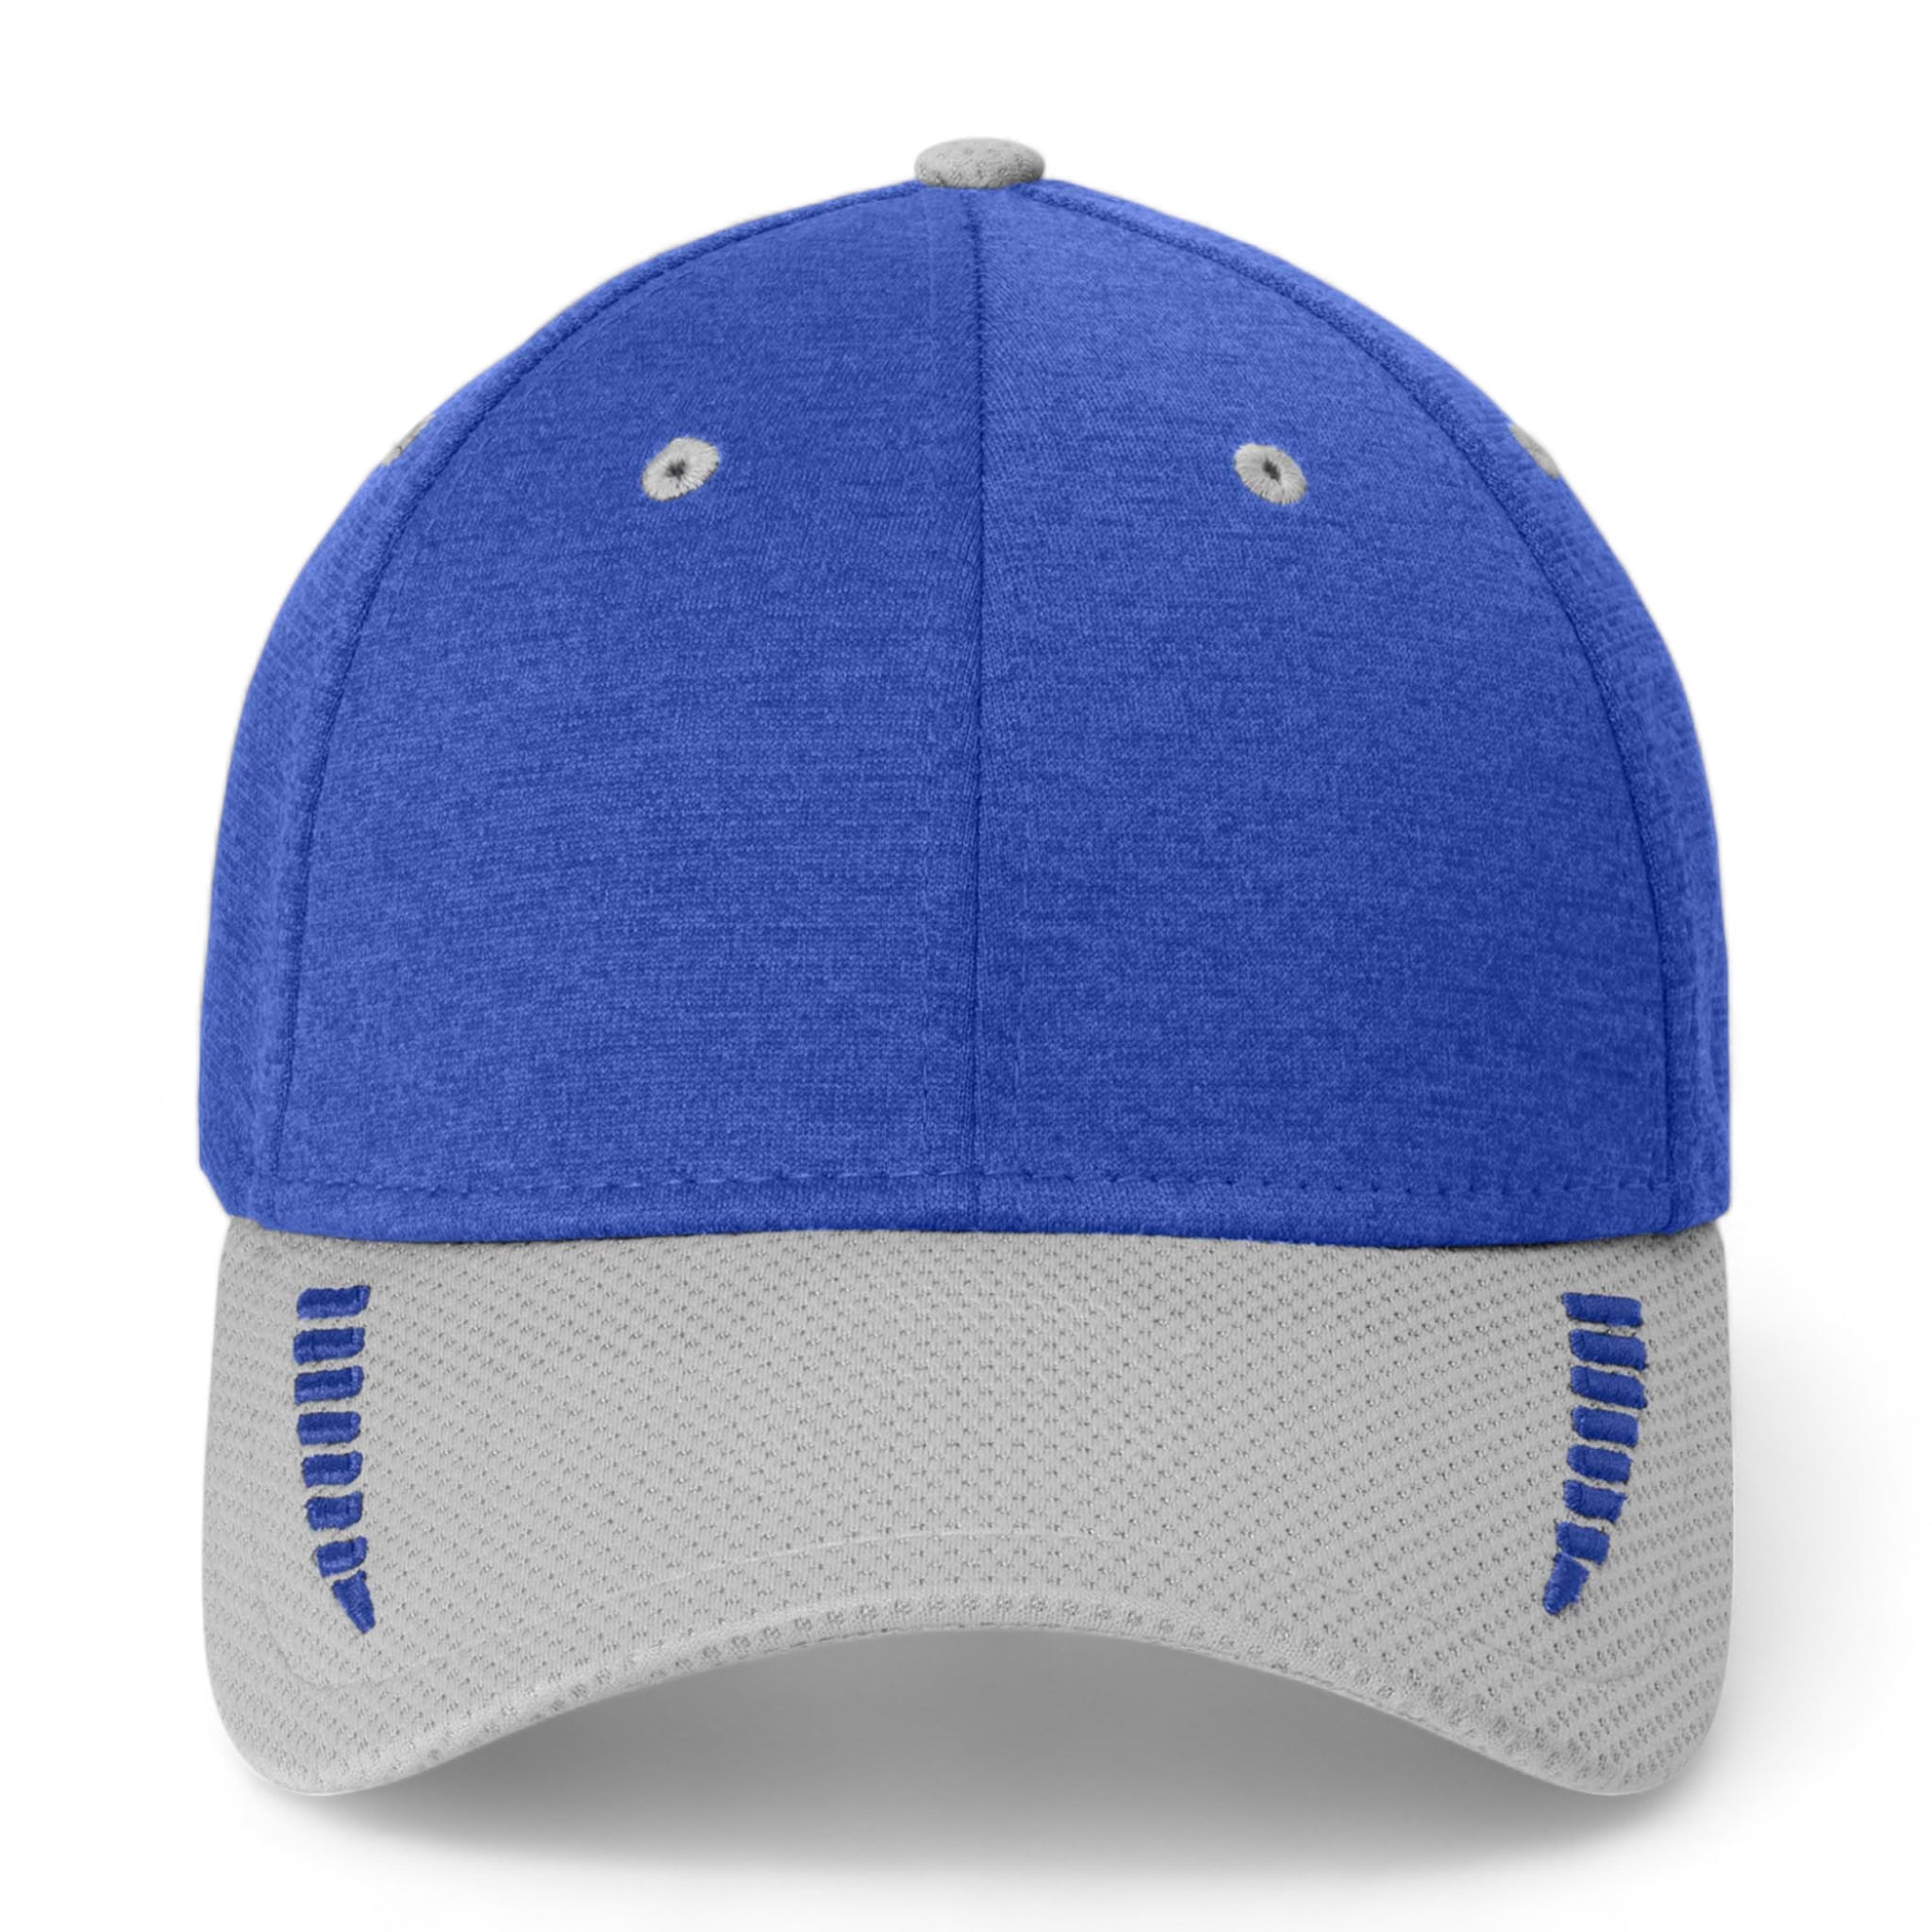 Front view of New Era NE704 custom hat in grey and royal shadow heather